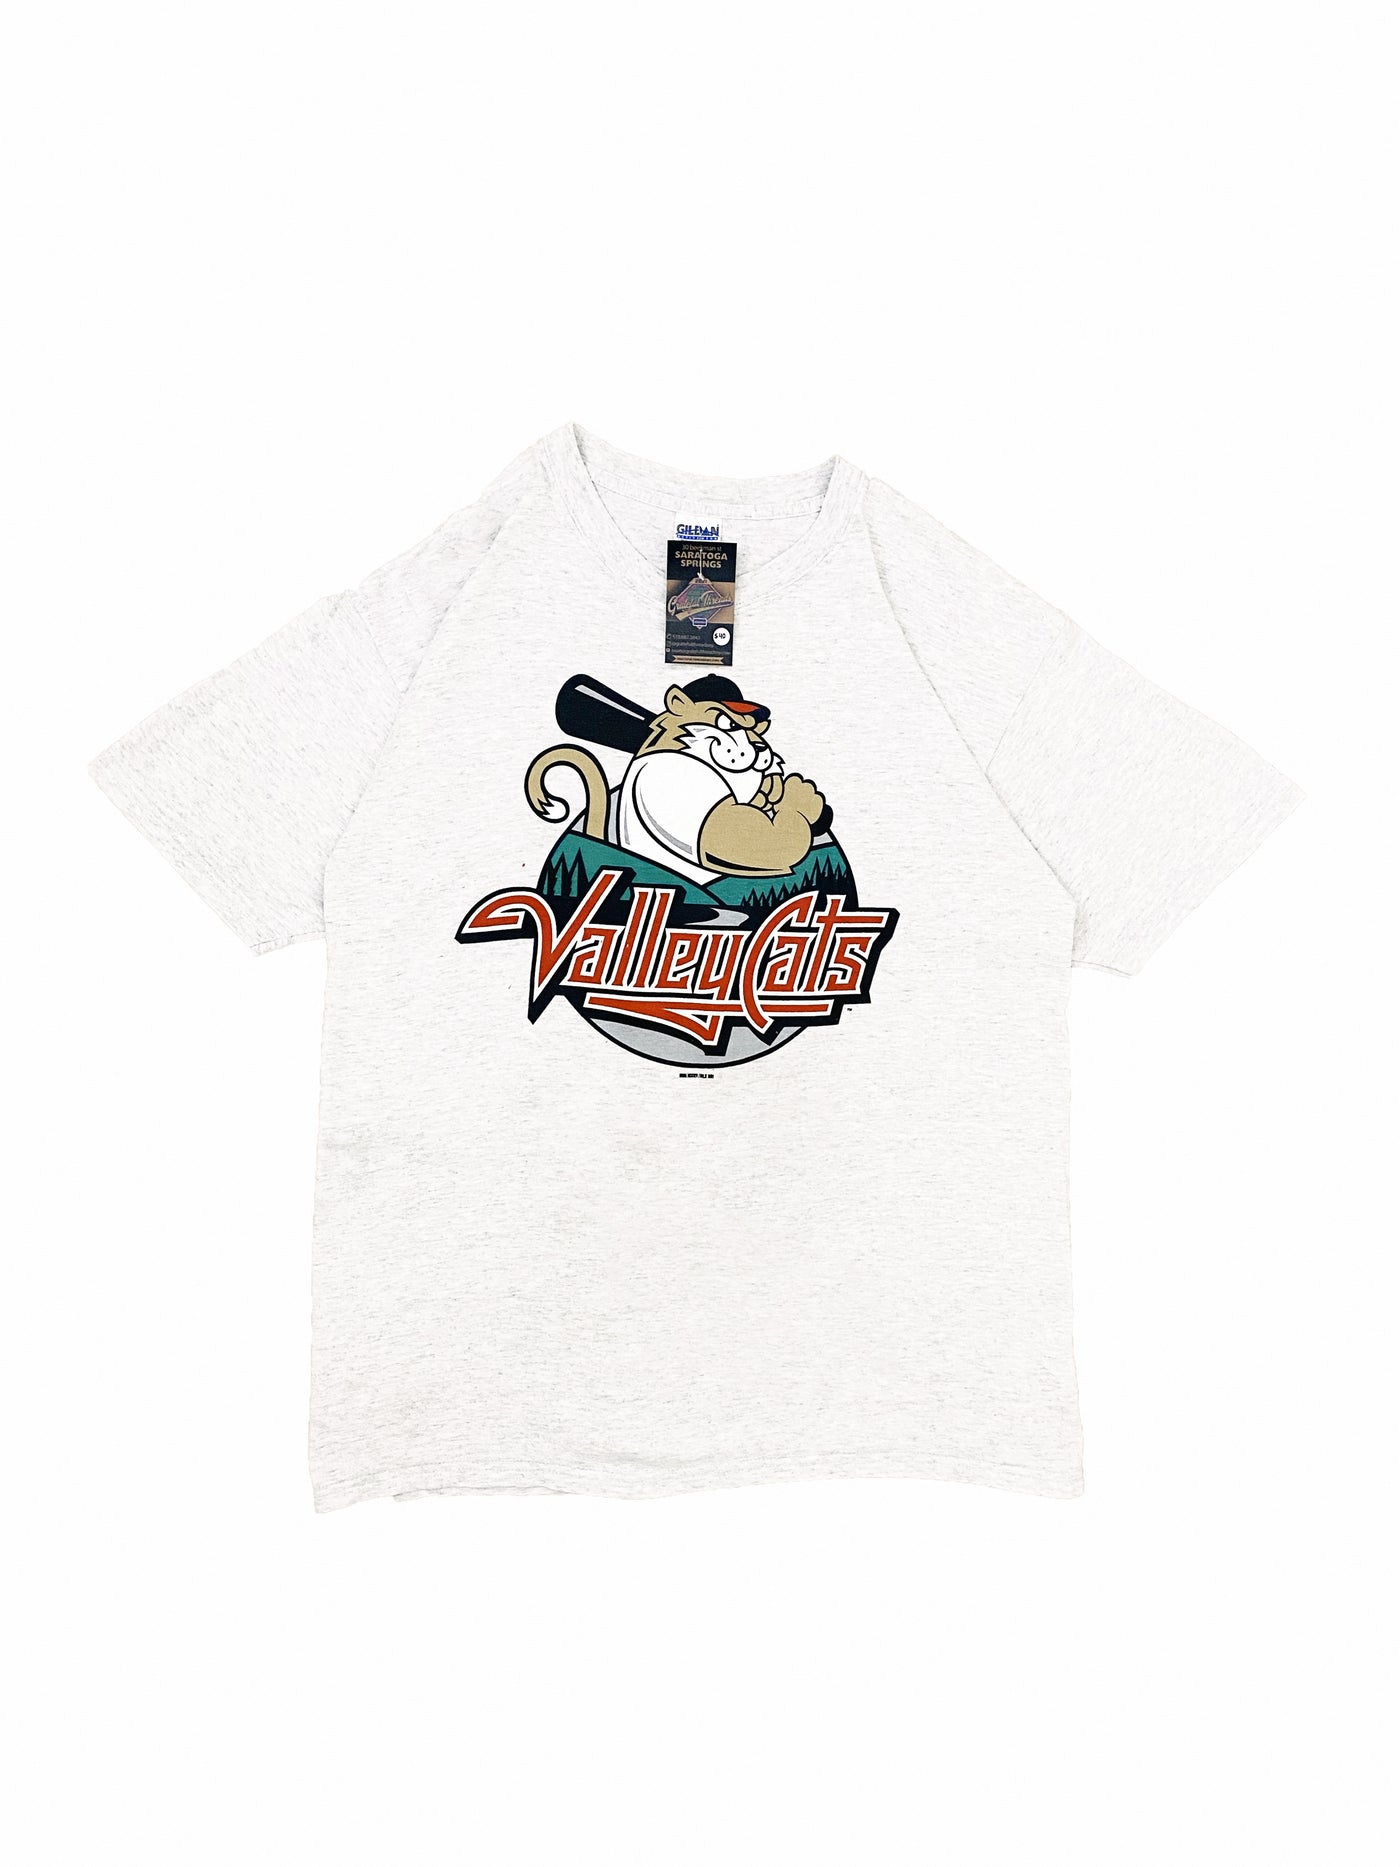 Vintage 2001 Valley Cats T-Shirt